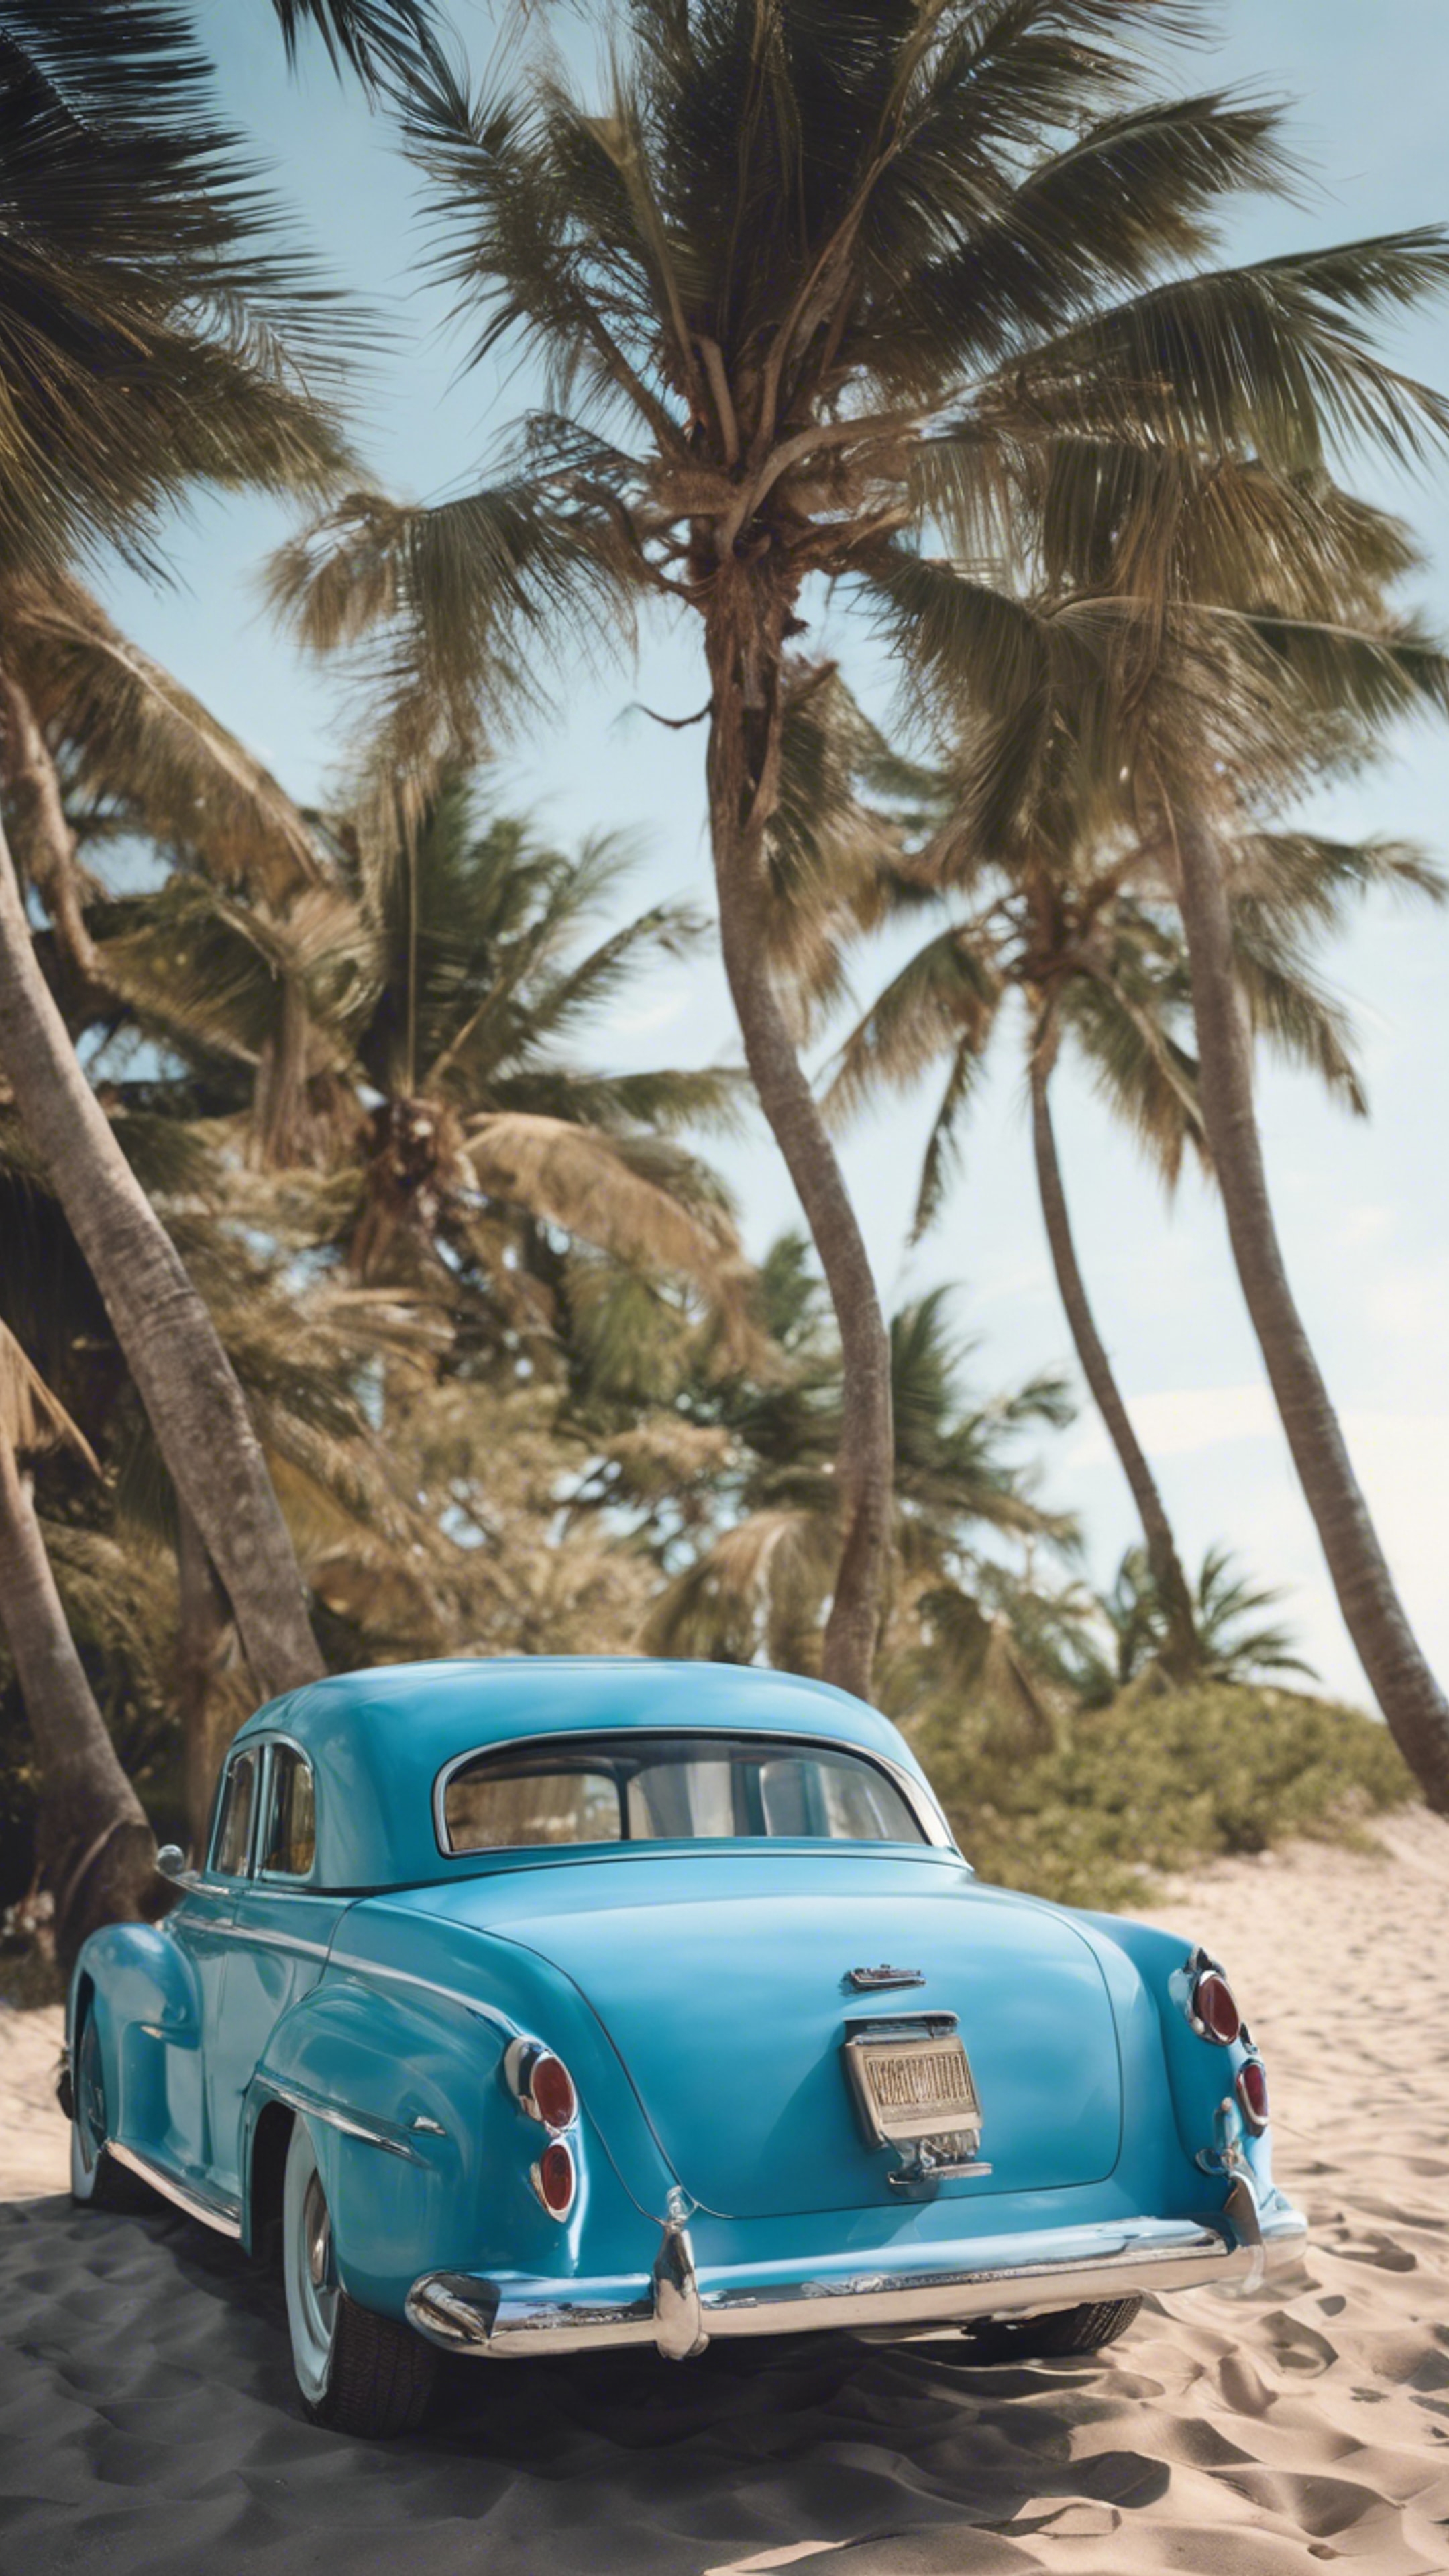 A vintage car painted in cool blue, parked by the beach Sfondo[7559f4037ca44818afd1]